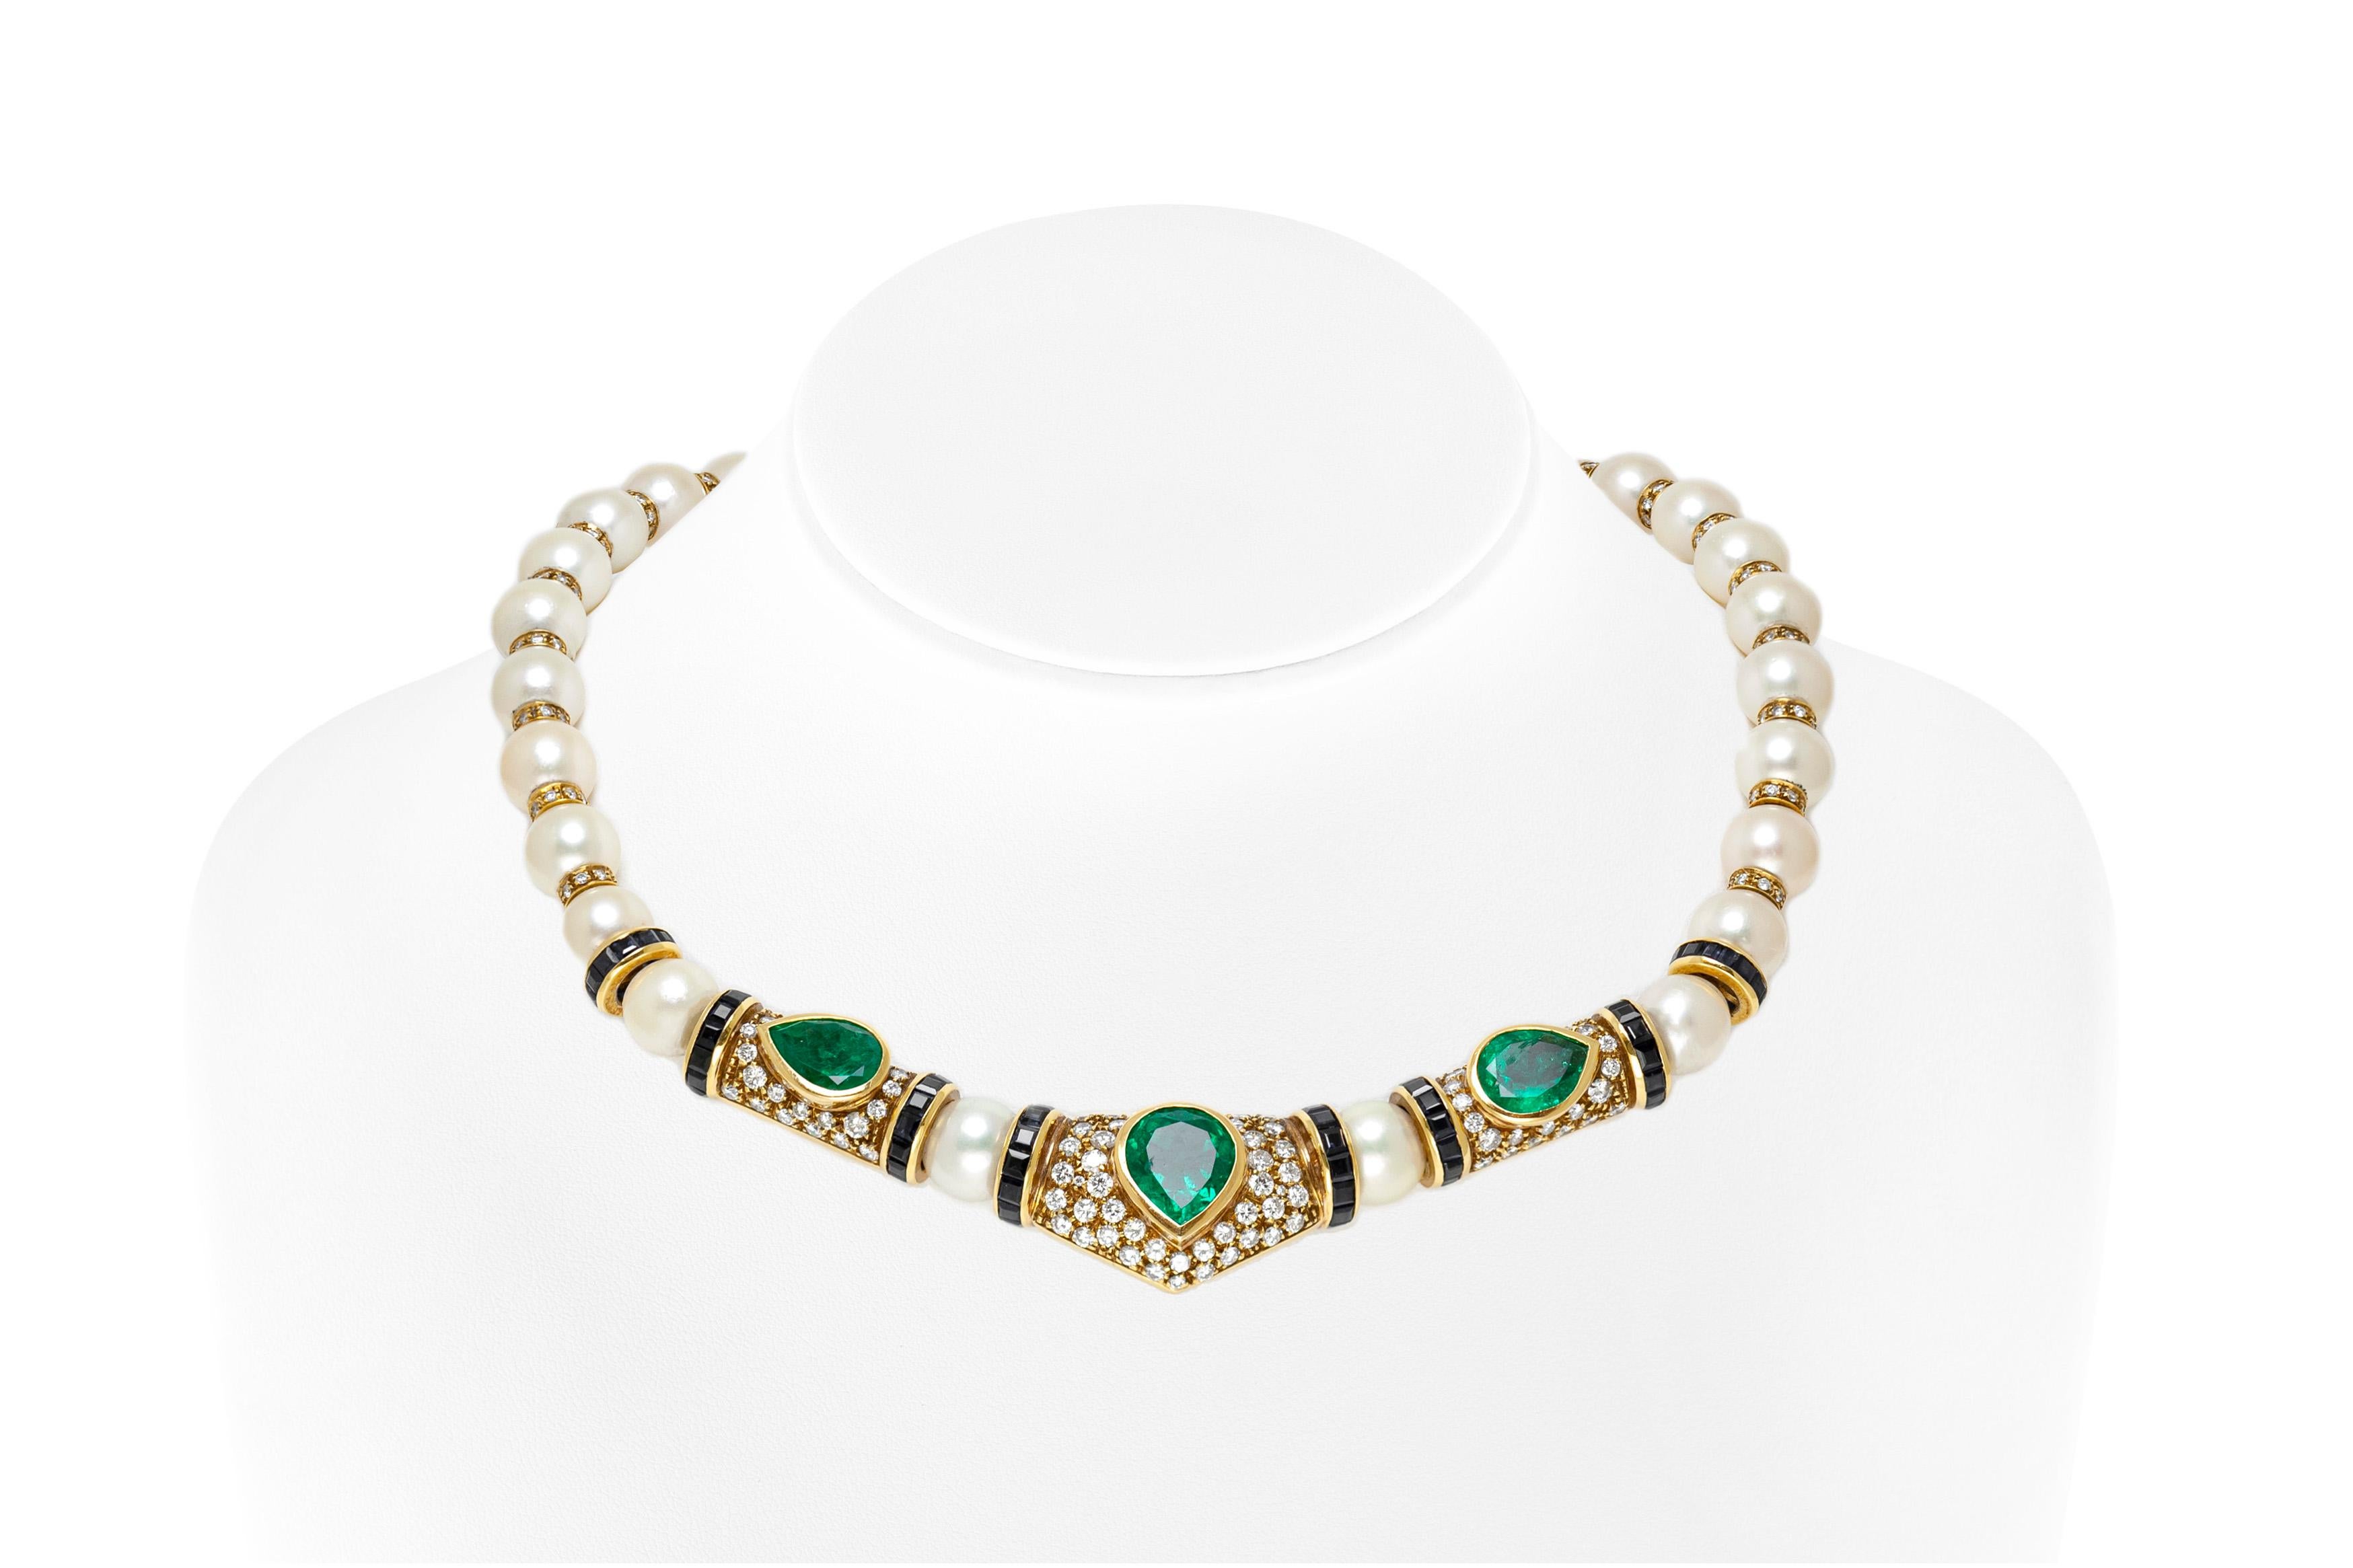 Necklace, finely crafted in 18k yellow gold with pearls, emeralds weighing approximately a total of 20.00 carat and diamonds weighing approximately a total of 10.50 carat. Circa 1980's.